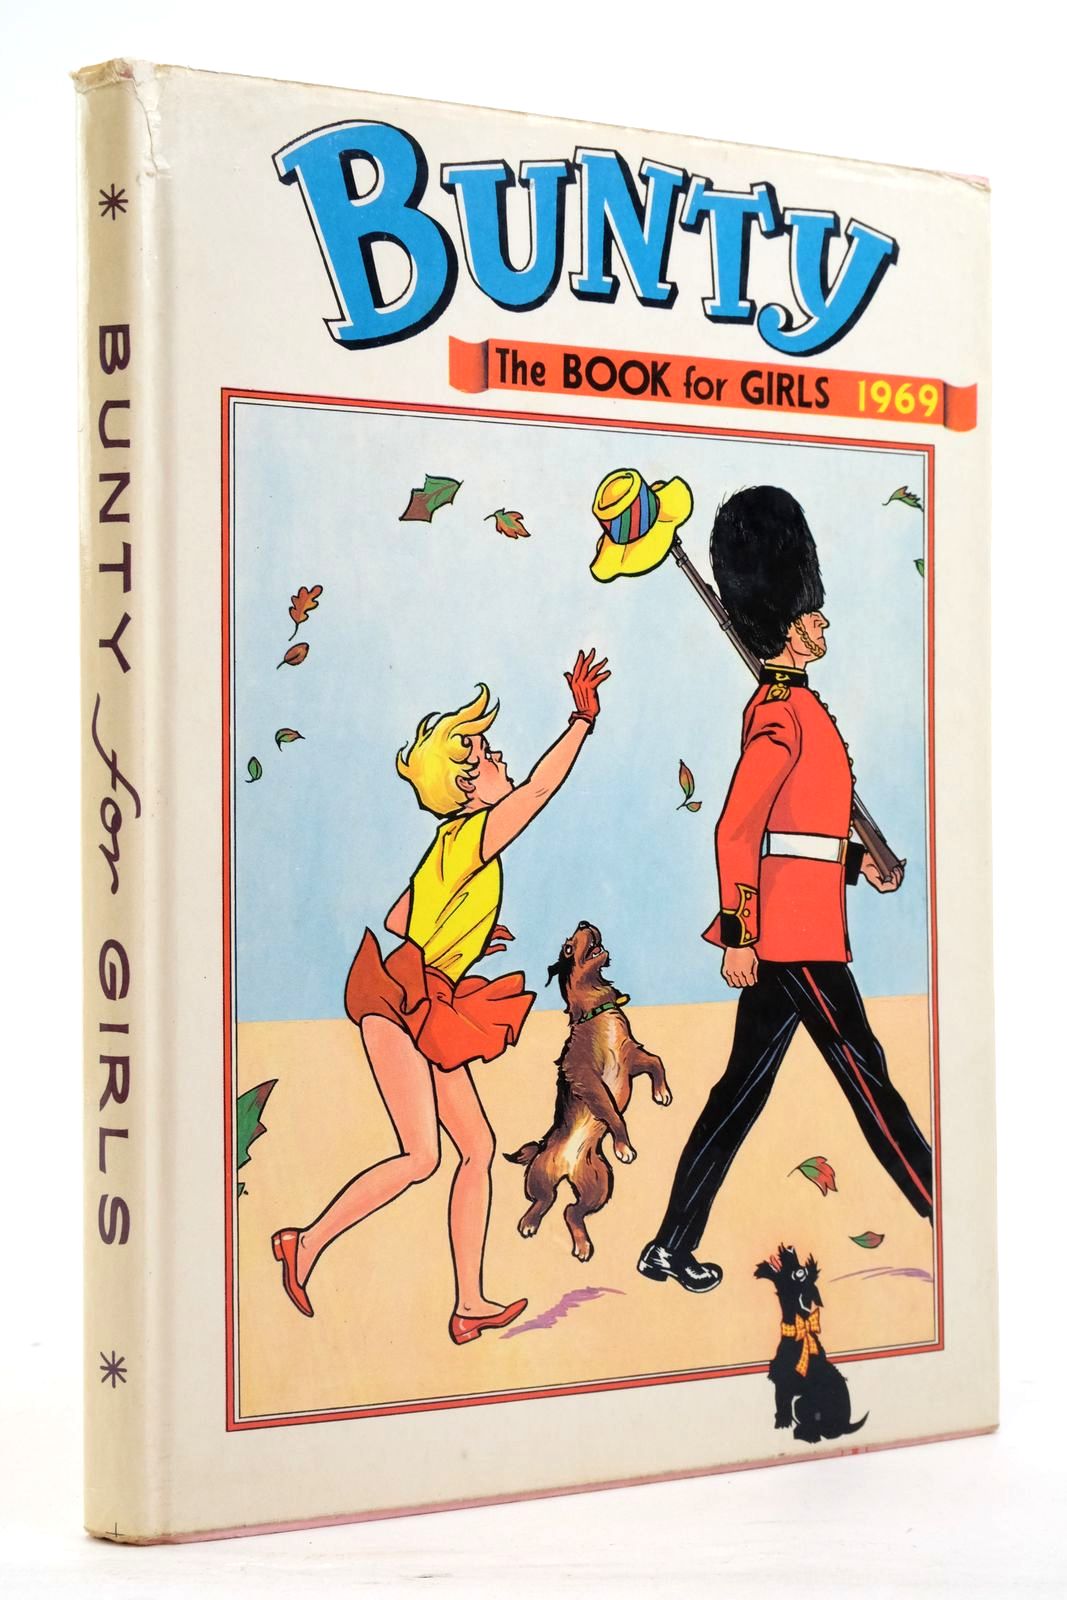 Photo of BUNTY FOR GIRLS 1969 published by D.C. Thomson &amp; Co Ltd. (STOCK CODE: 2138024)  for sale by Stella & Rose's Books